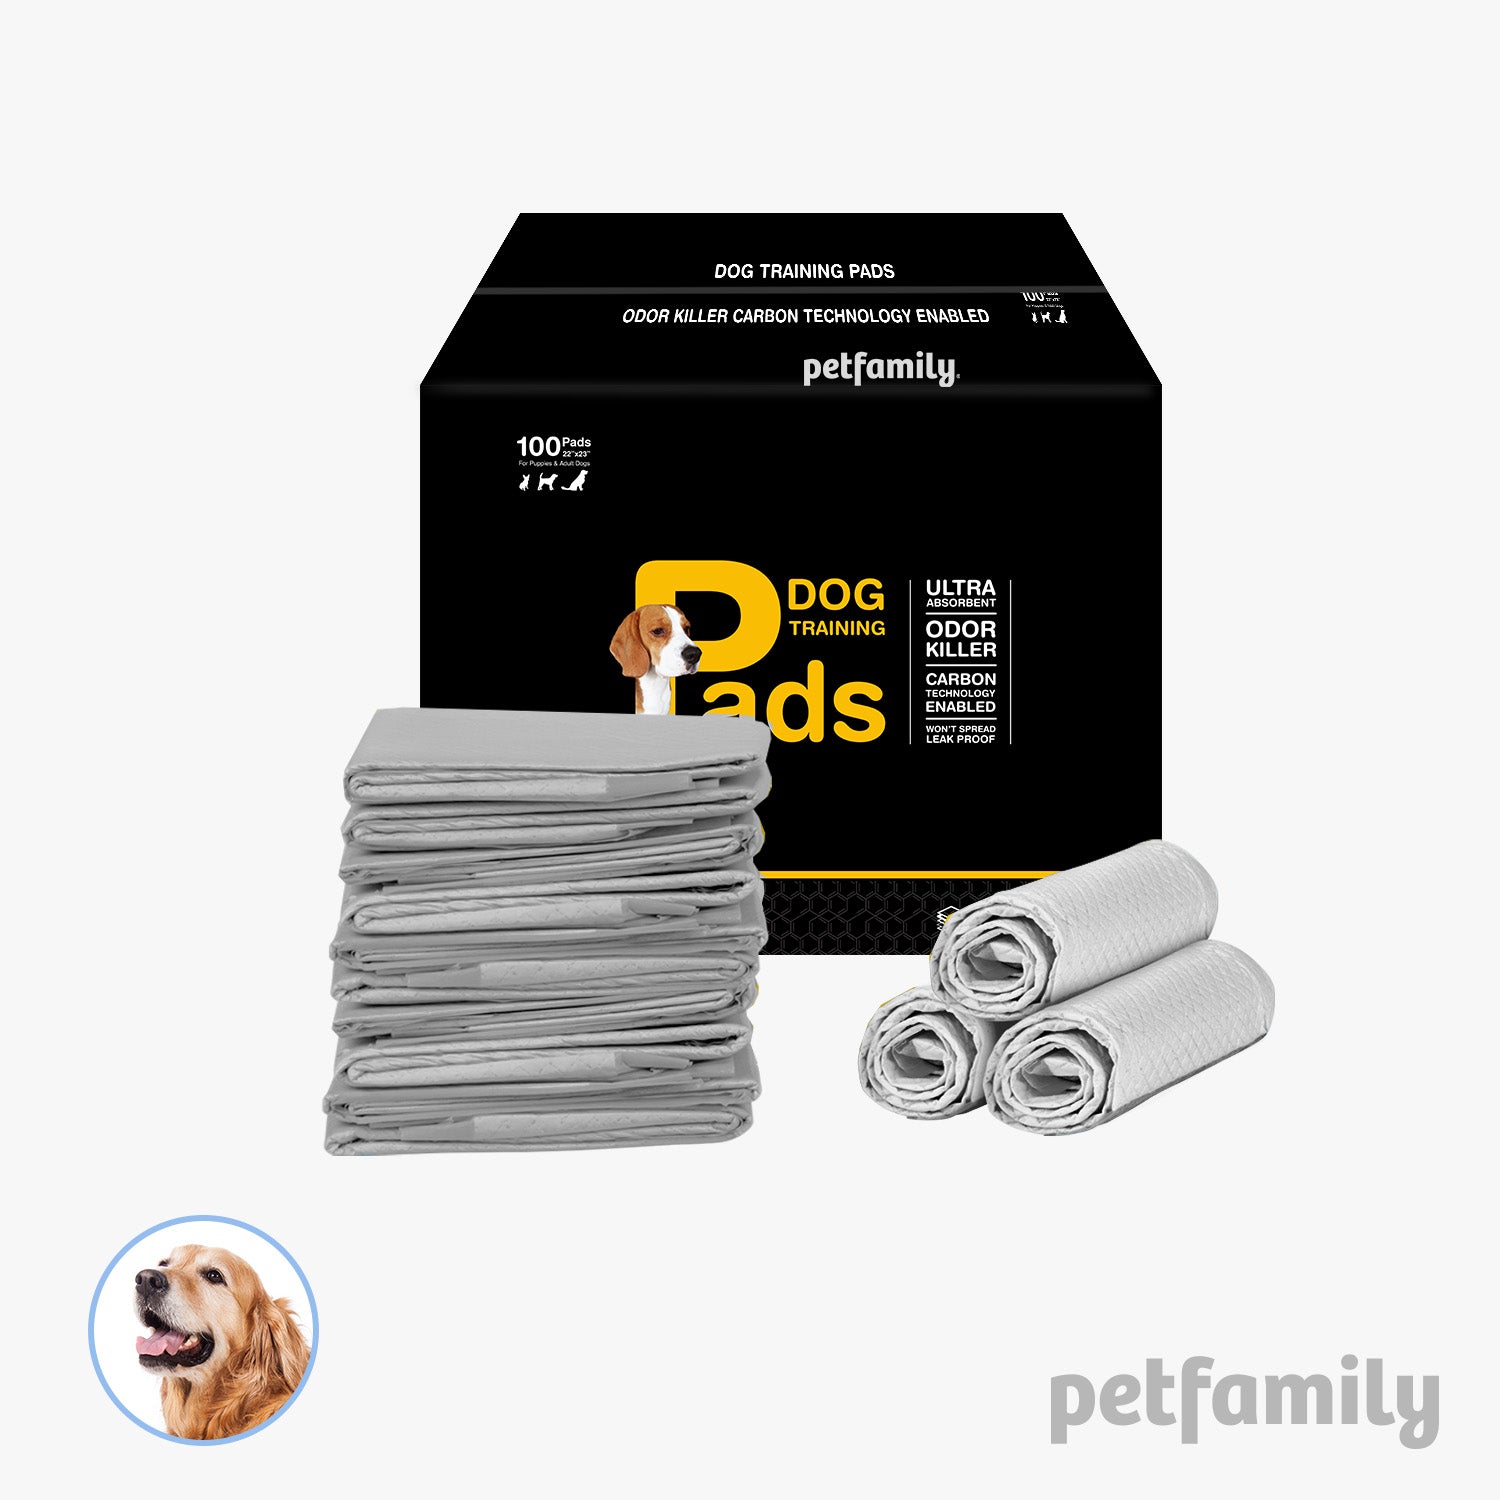 Carbon Dog Training Pads 22" x 23" 100 Pieces - Quick Drying and Ultra Absorbent